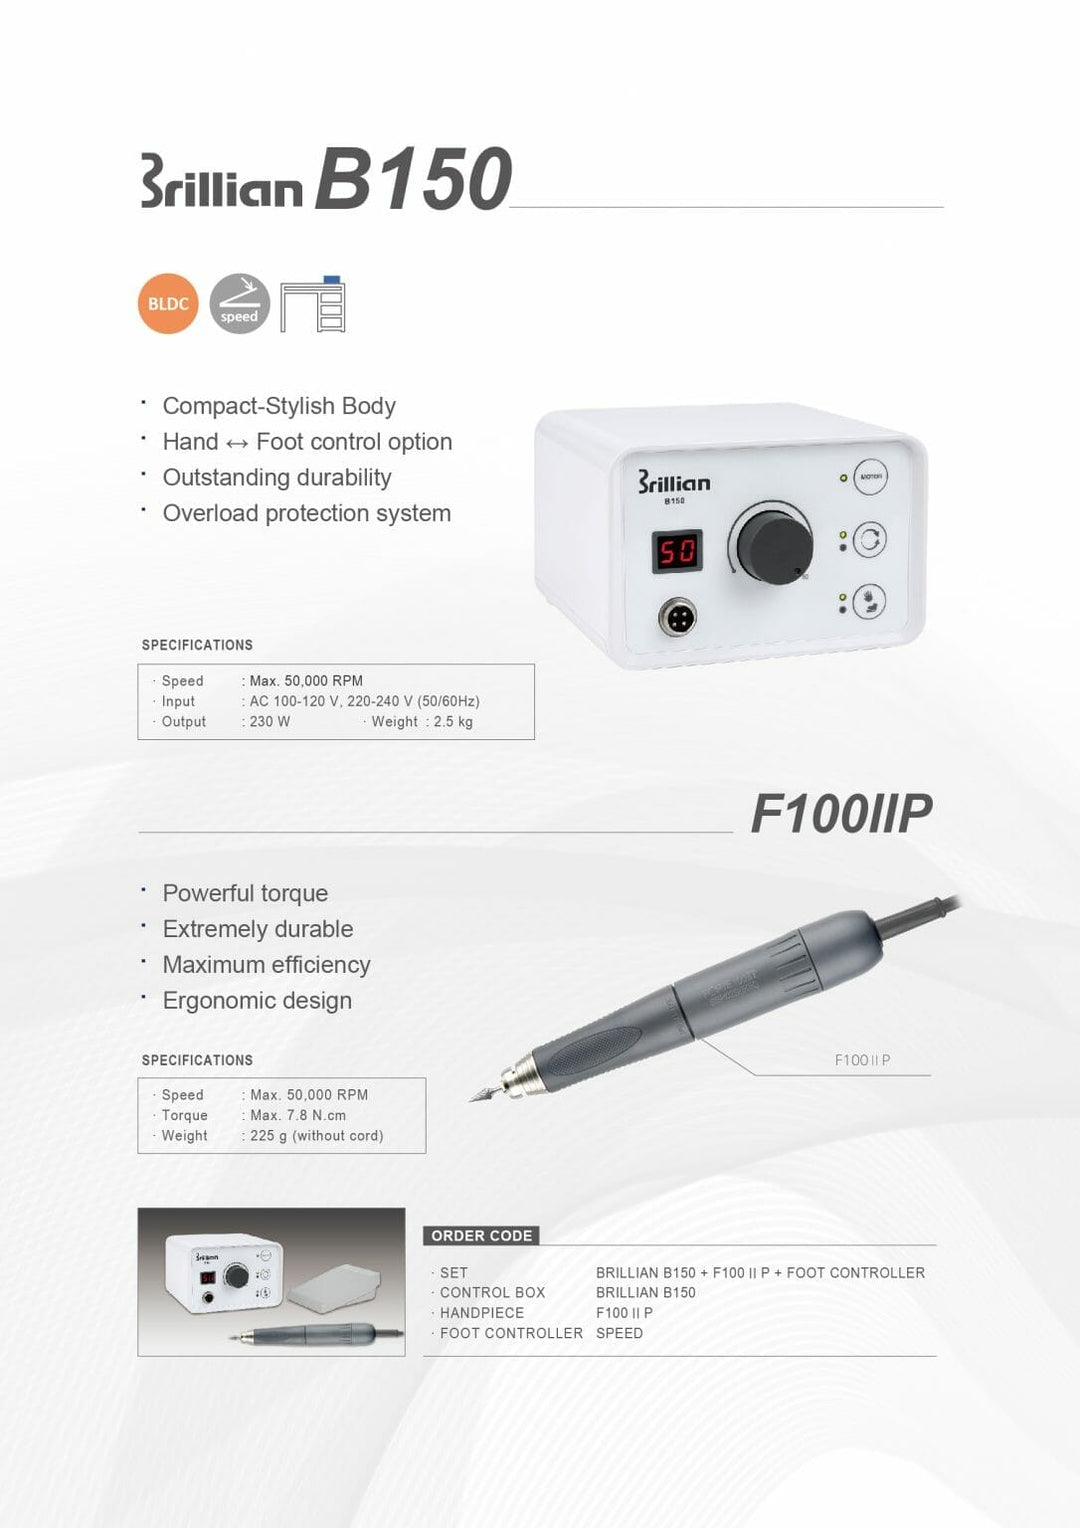 Saeshin B150 Powerful Nail Drill with Forte 100IIP Brushless handpiece Original with 7.8 torque